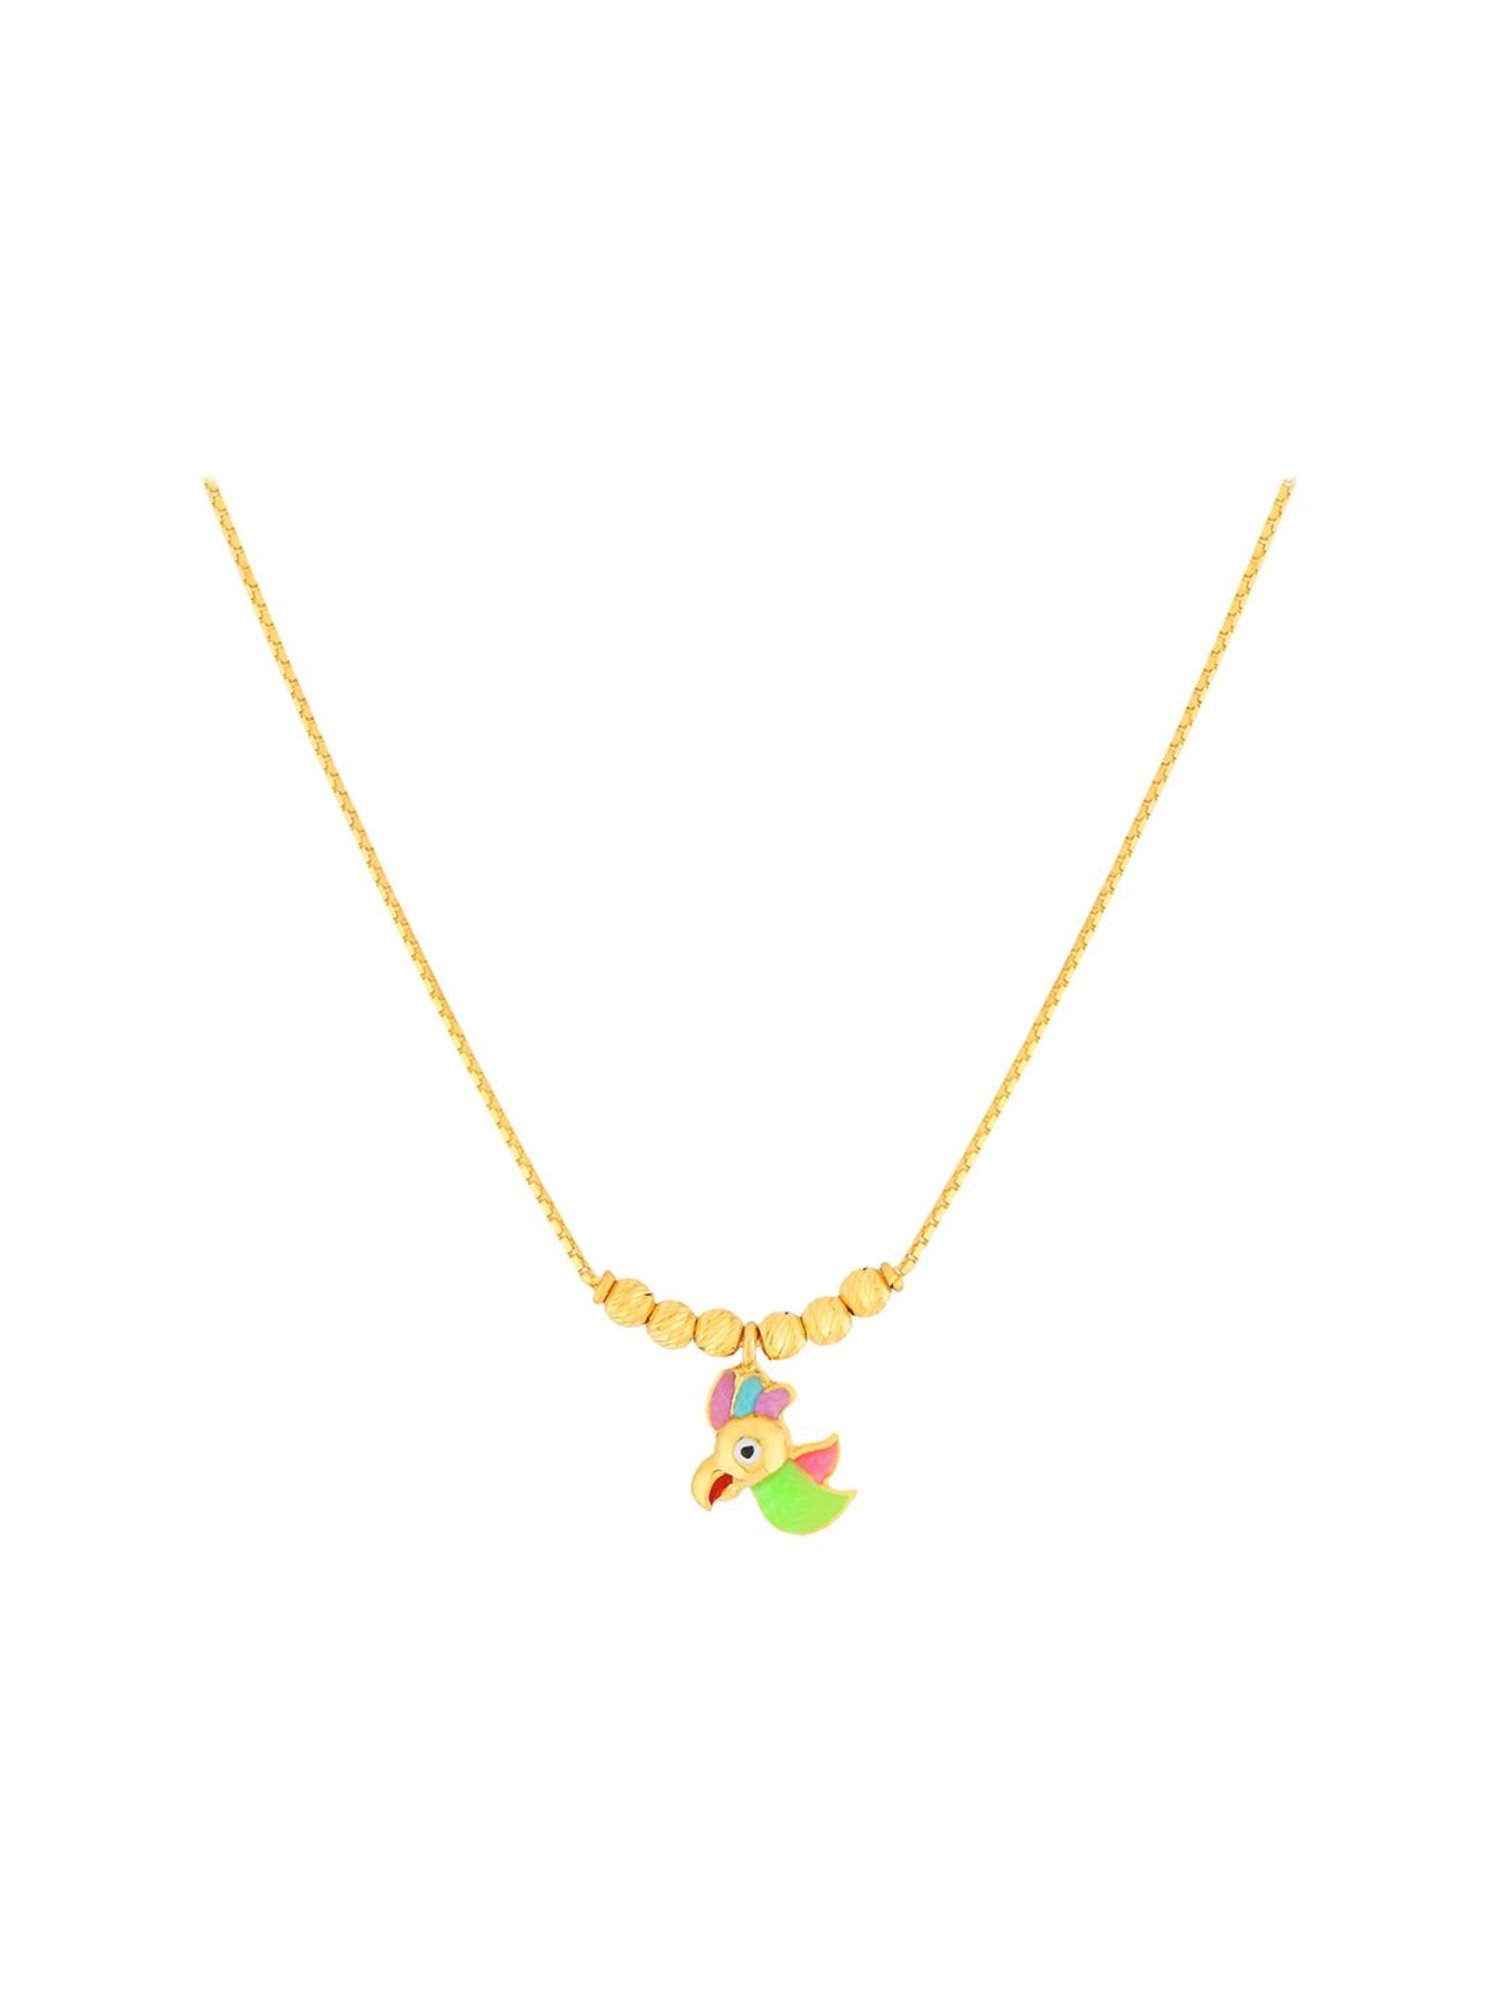 Buy Gorse Kids Necklace Beads Chain Chunky Necklace Bubblegum Necklace  Unicorn Pendant Toddler Jewelry DIY Party Halloween Purple Online at Low  Prices in India - Amazon.in